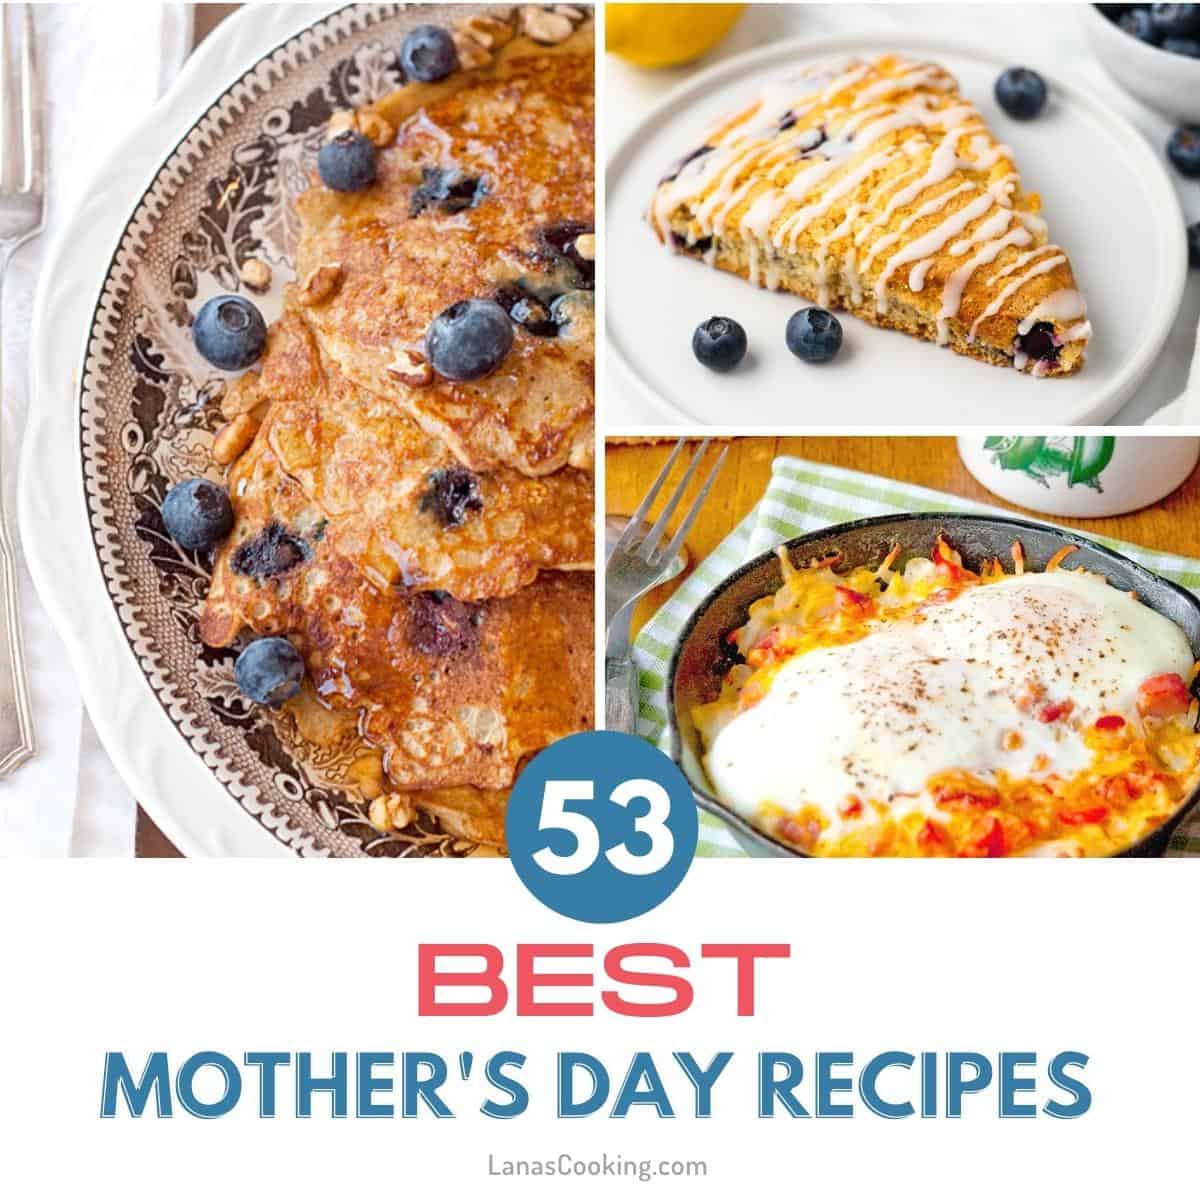 Best Mother’s Day Recipes